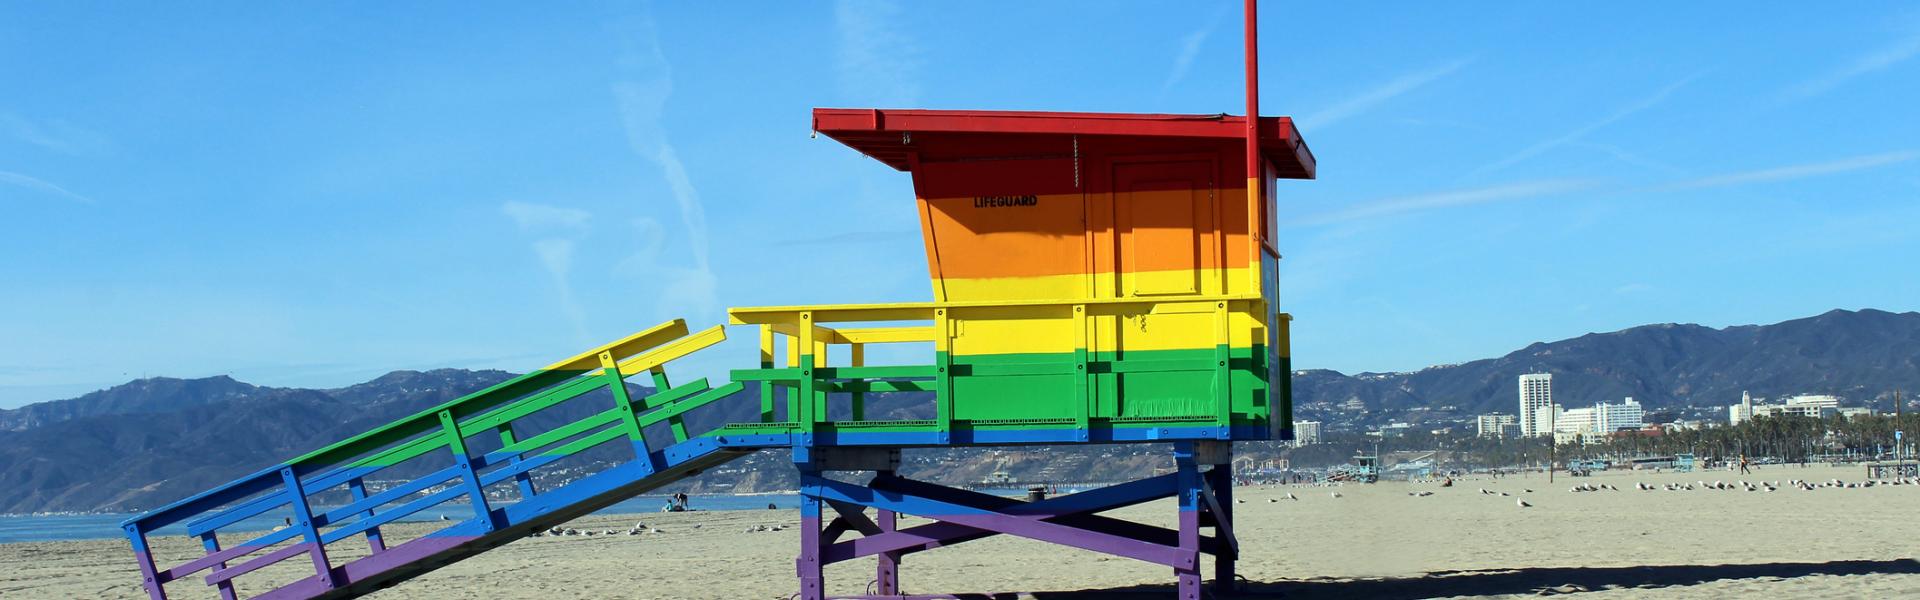 View of a wooden hut painted in rainbow colors standing on a beach.